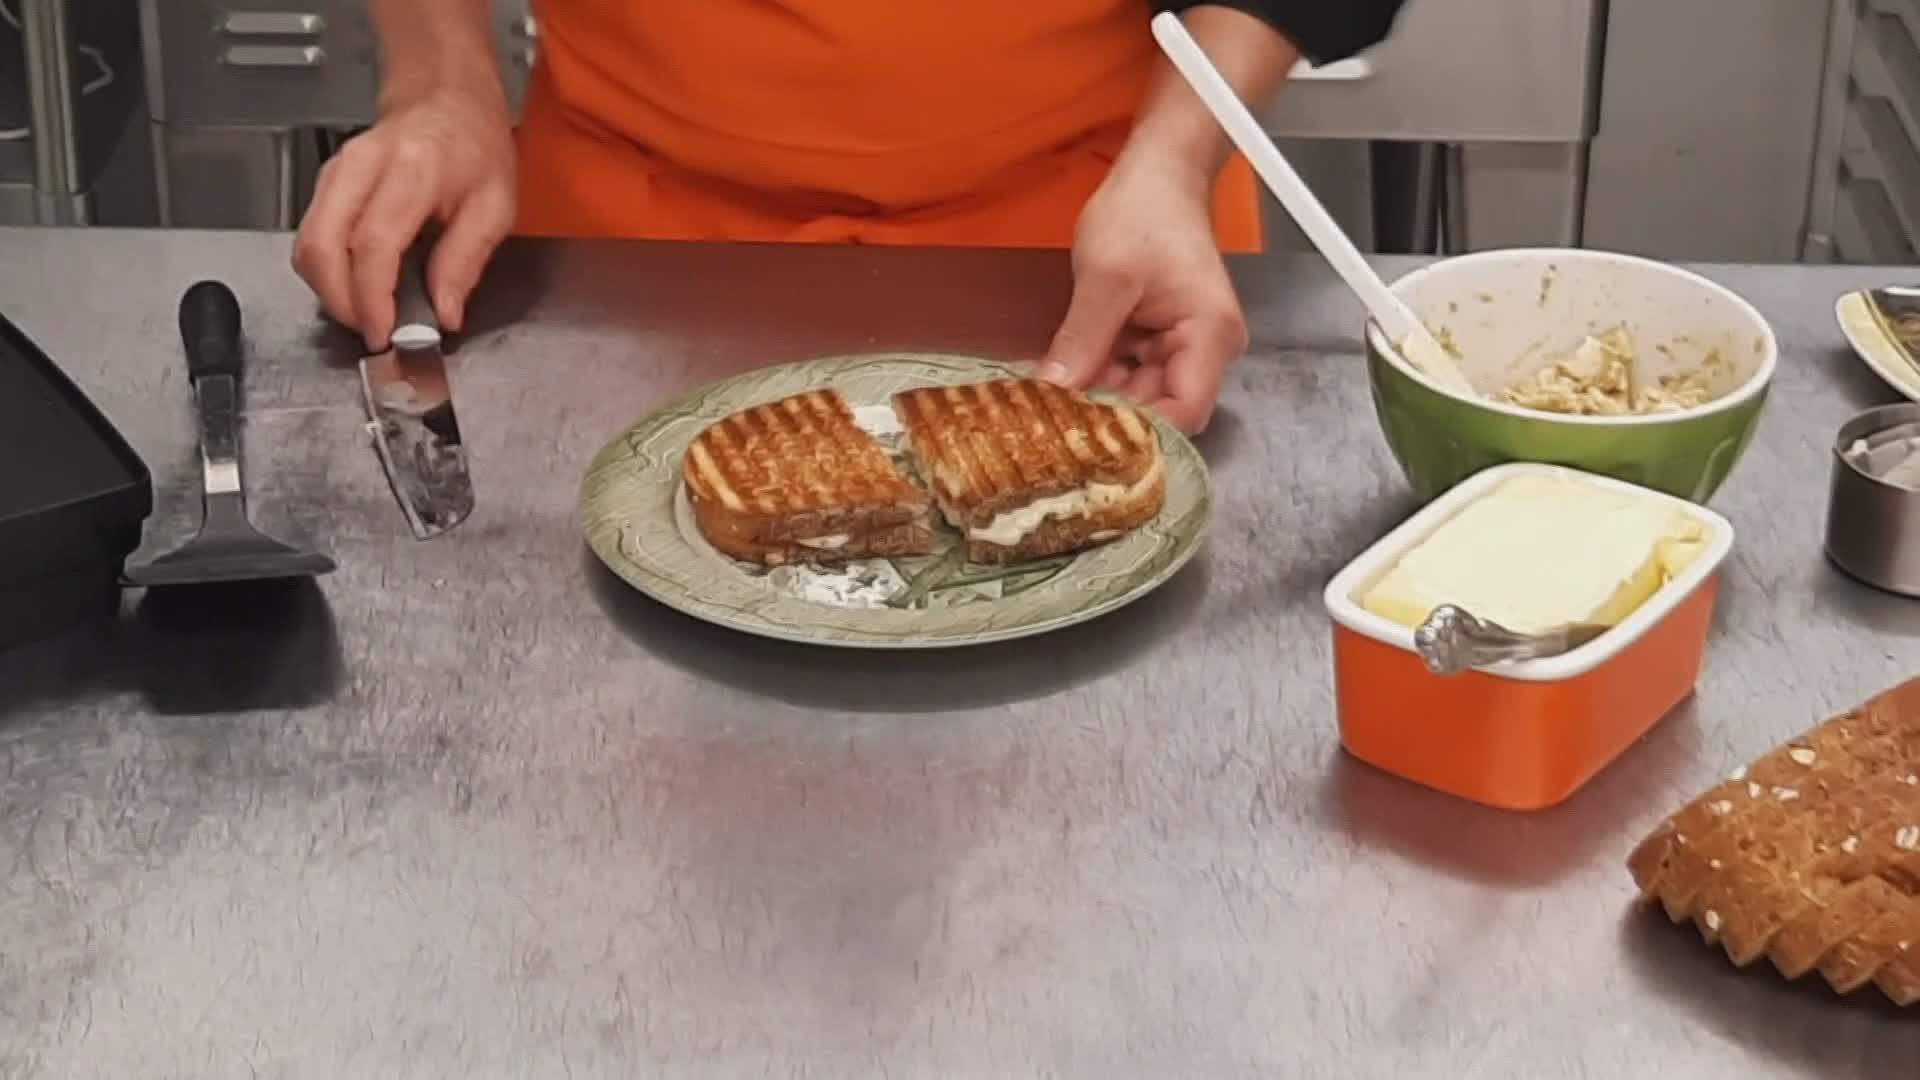 Chef Chase Harris of the Harris Turkey Farm shows us how to layer together a panini at home